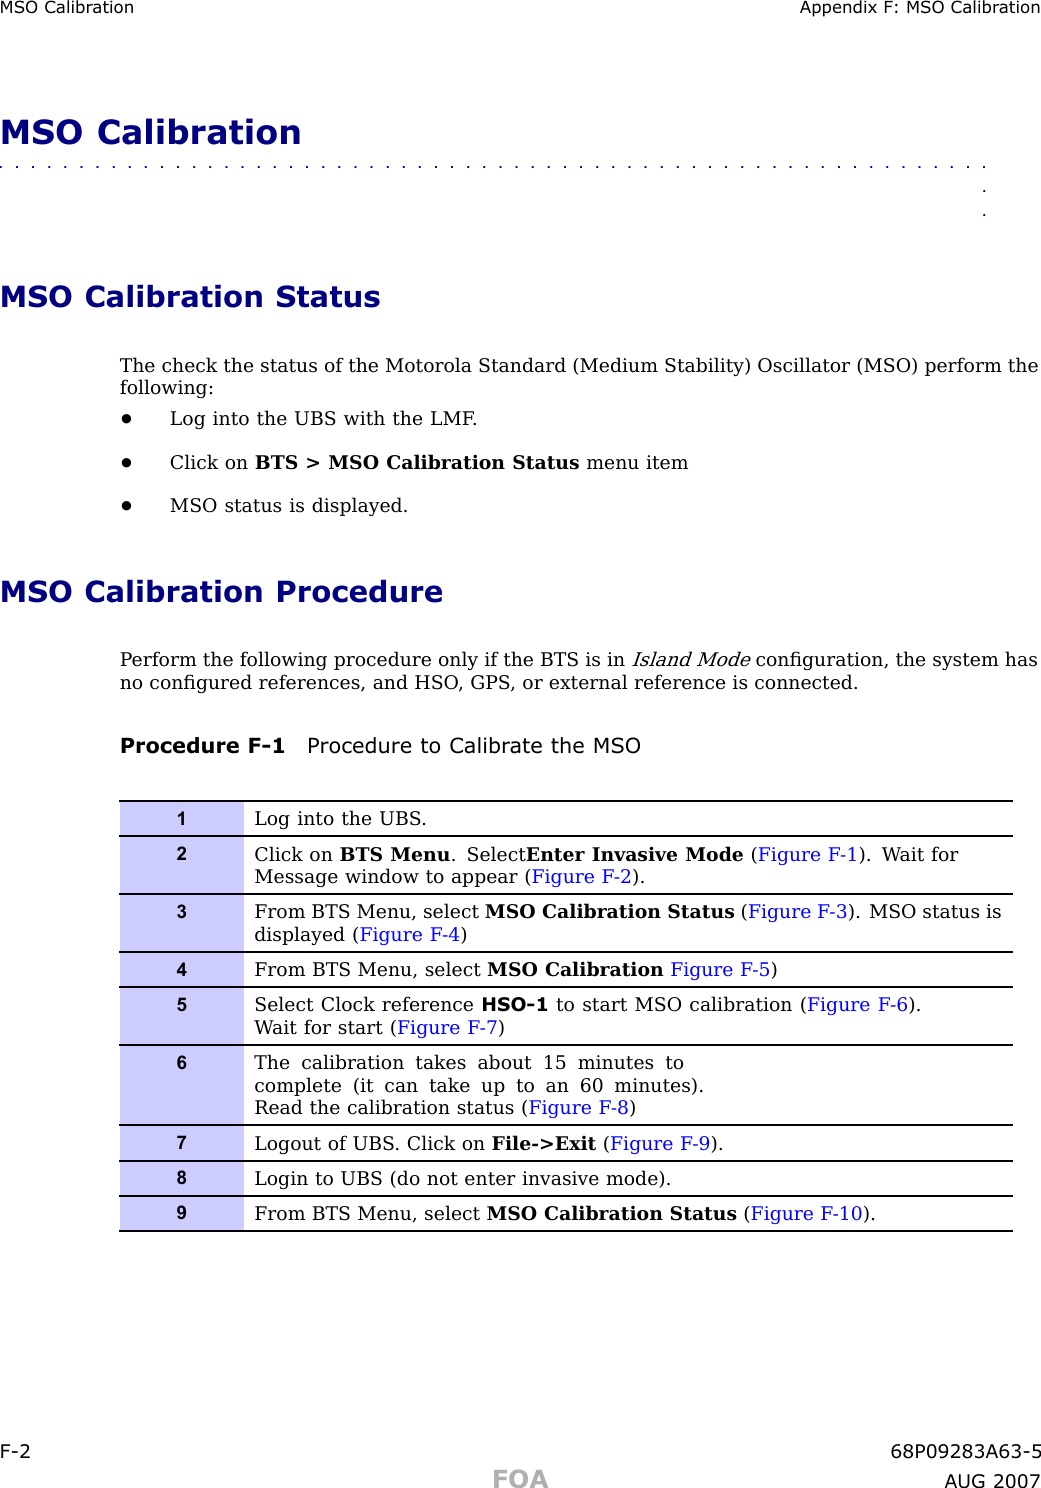 MSO Calibr ation Appendix F : MSO Calibr ationMSO Calibration■■■■■■■■■■■■■■■■■■■■■■■■■■■■■■■■■■■■■■■■■■■■■■■■■■■■■■■■■■■■■■■■MSO Calibration StatusThe check the status of the Motorola Standard (Medium Stability) Oscillator (MSO) perform thefollowing:•Log into the UBS with the LMF .•Click on BTS &gt; MSO Calibration Status menu item•MSO status is displayed.MSO Calibration ProcedureP erform the following procedure only if the BTS is inIsland Modeconﬁguration, the system hasno conﬁgured references, and HSO , GPS , or external reference is connected.Procedure F -1 Procedure to Calibr ate the MSO1Log into the UBS .2Click on BTS Menu . Select Enter Invasive Mode (Figure F -1 ). W ait forMessage window to appear ( Figure F -2 ).3From BTS Menu, select MSO Calibration Status (Figure F -3 ). MSO status isdisplayed ( Figure F -4 )4From BTS Menu, select MSO Calibration Figure F -5 )5Select Clock reference HSO-1 to start MSO calibration ( Figure F -6 ).W ait for start ( Figure F -7 )6The calibration takes about 15 minutes tocomplete (it can take up to an 60 minutes).Read the calibration status ( Figure F -8 )7Logout of UBS . Click on File-&gt;Exit (Figure F -9 ).8Login to UBS (do not enter invasive mode).9From BTS Menu, select MSO Calibration Status (Figure F -10 ).F -2 68P09283A63 -5FOA A UG 2007